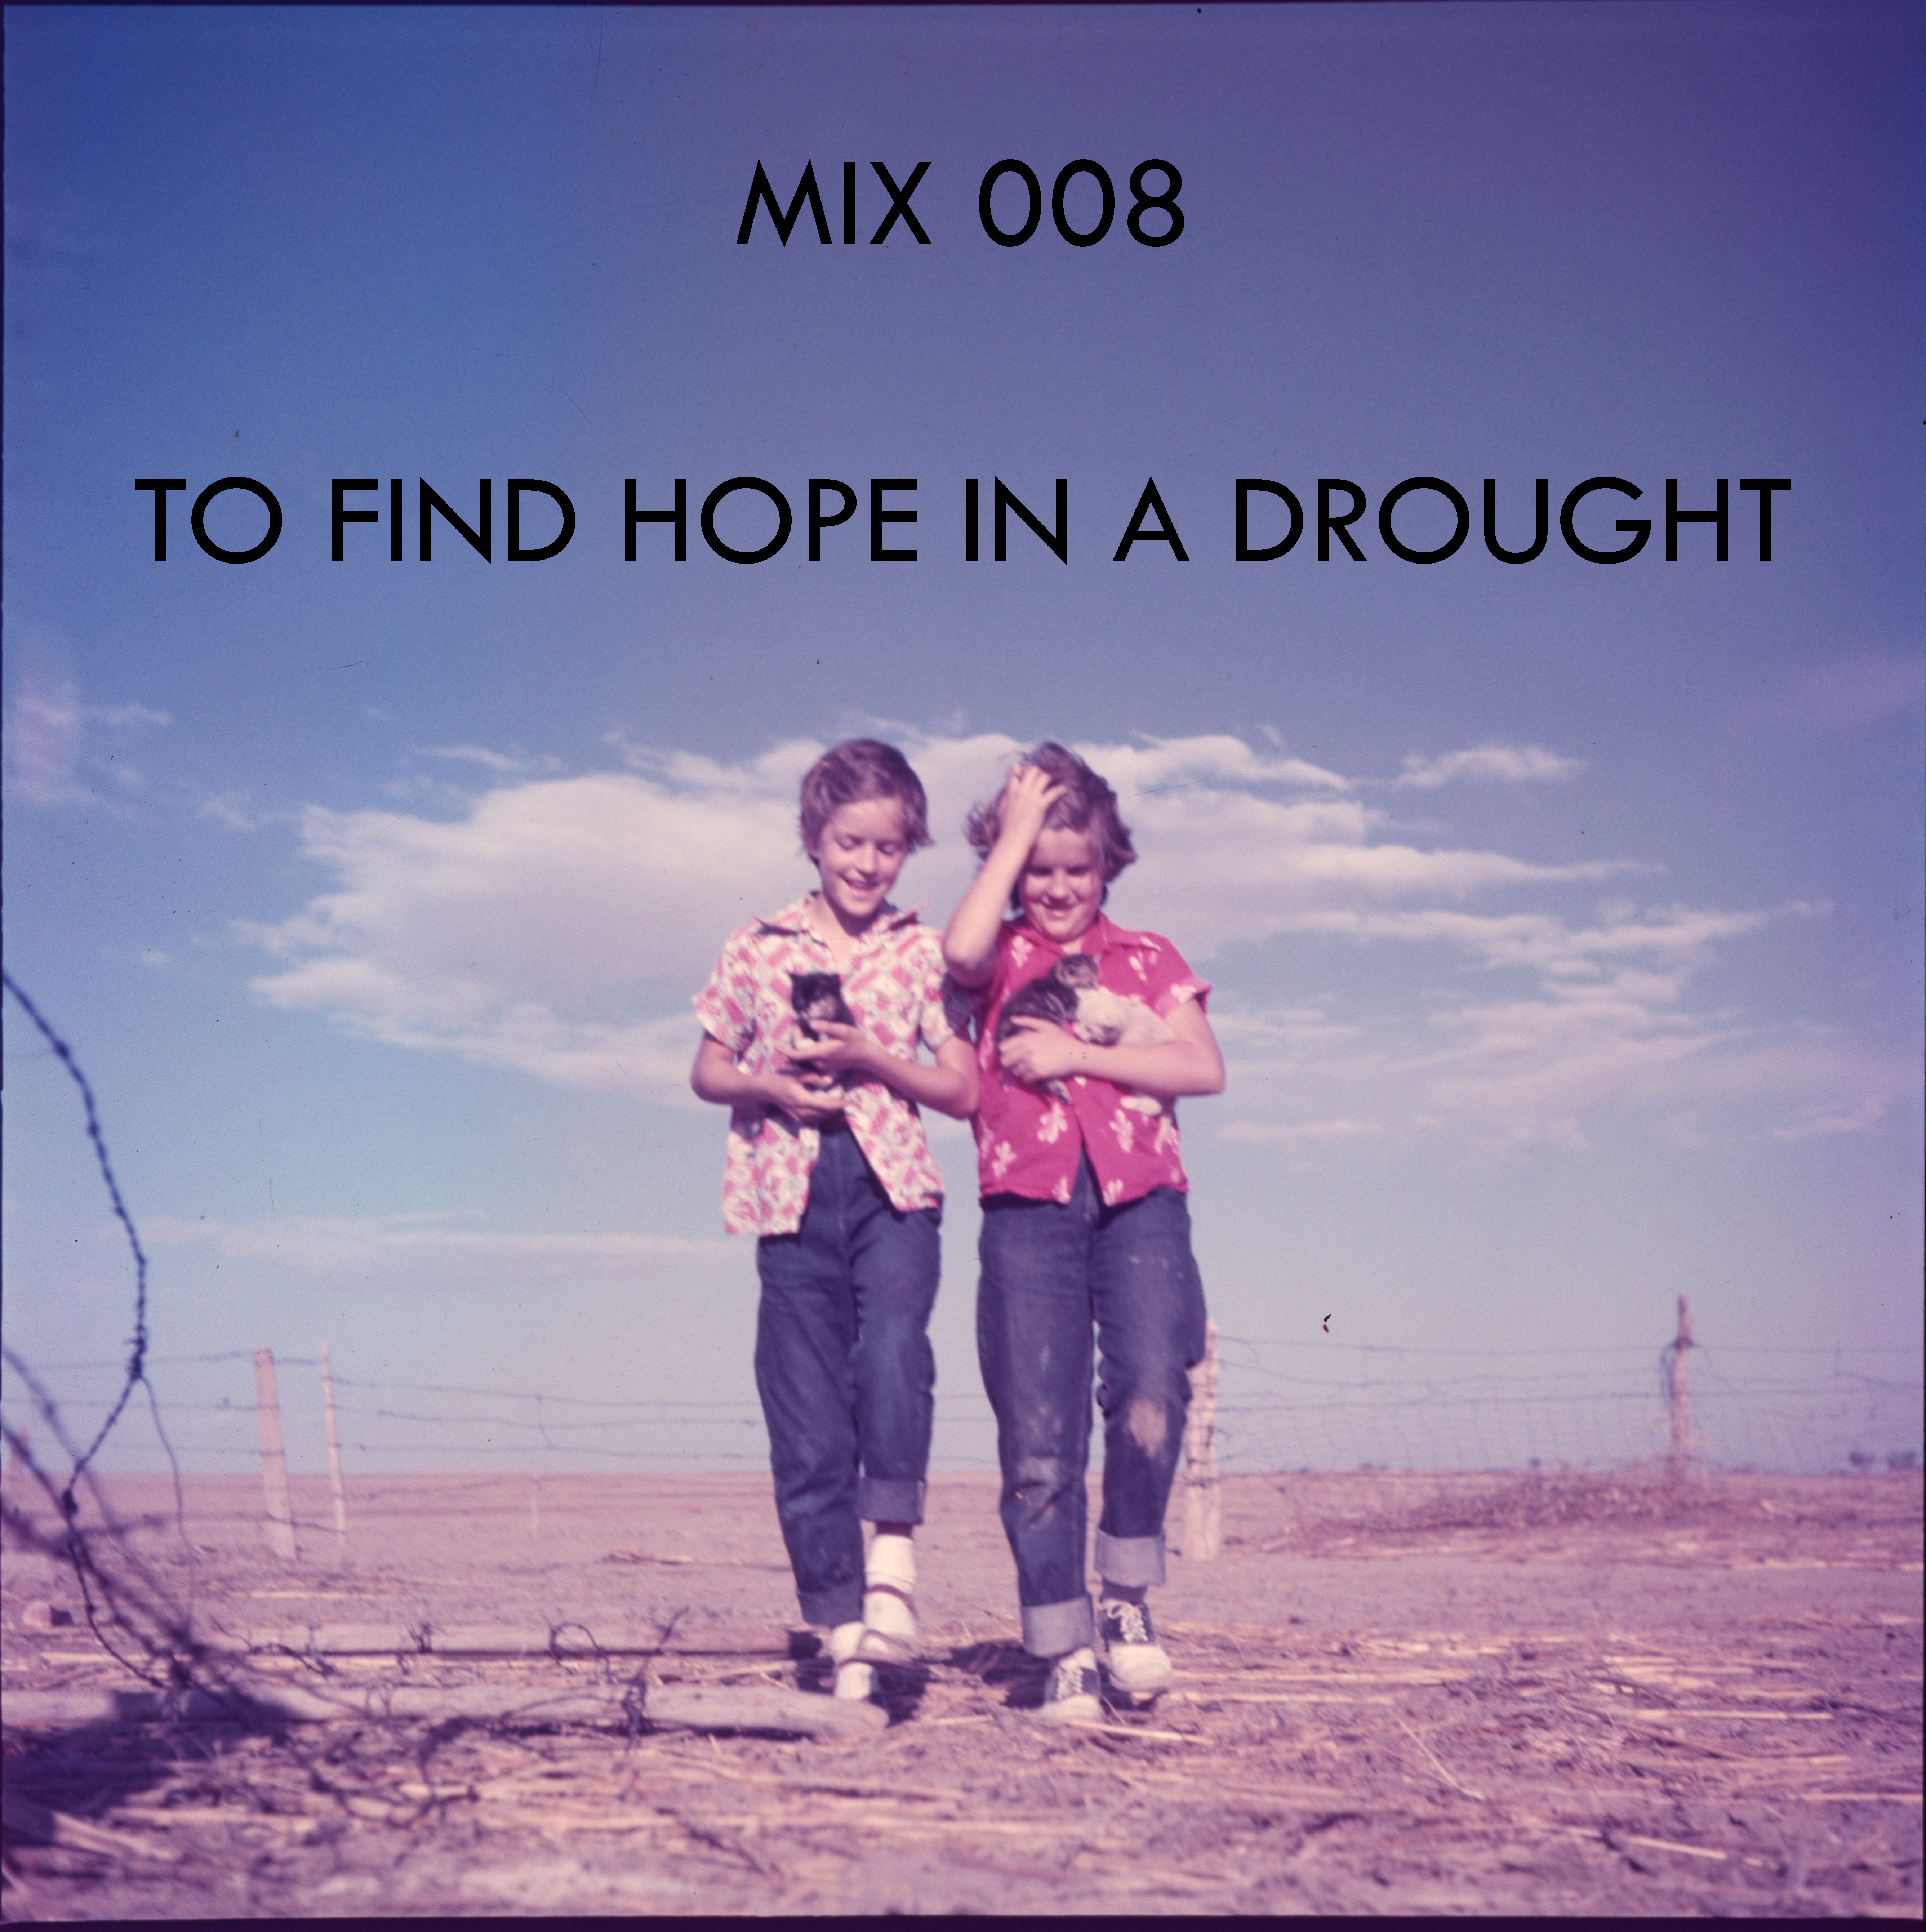 Mix 008 – To Find Hope in a Drought